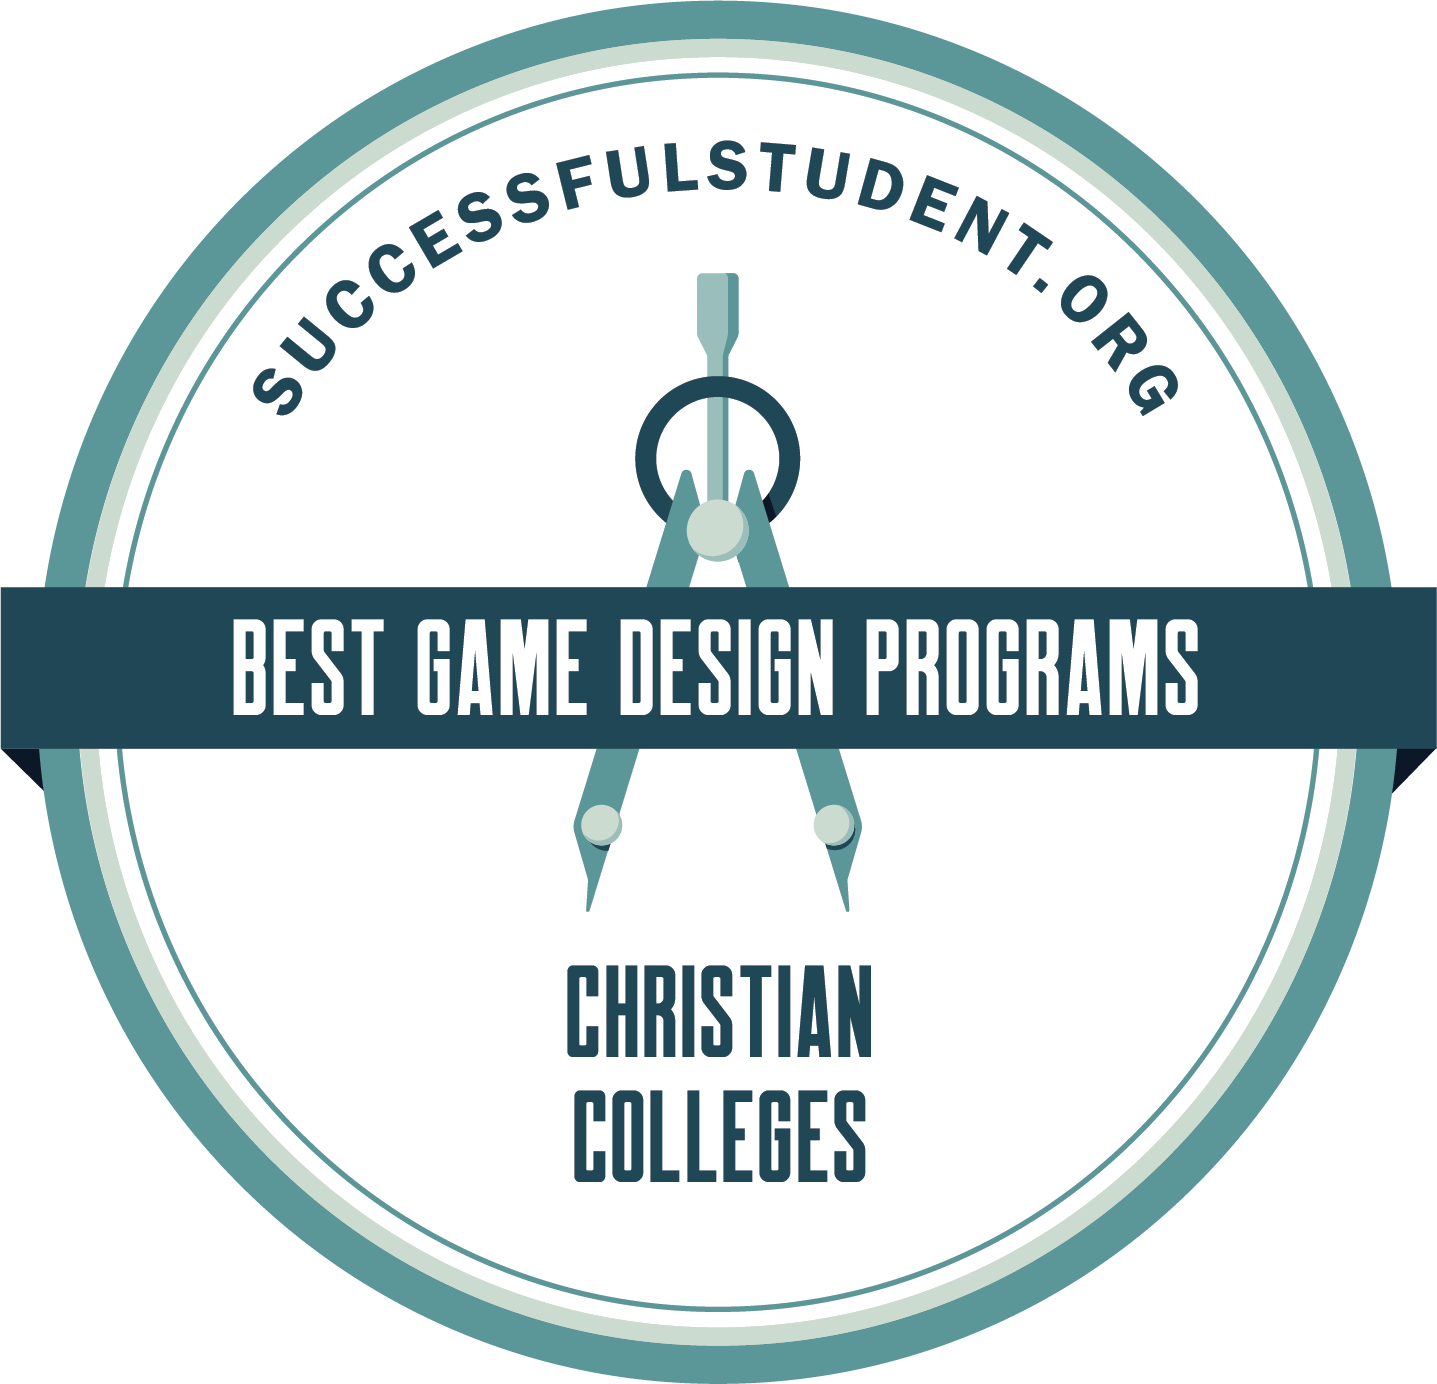 The Best Game Design Programs at Christian Colleges's Badge